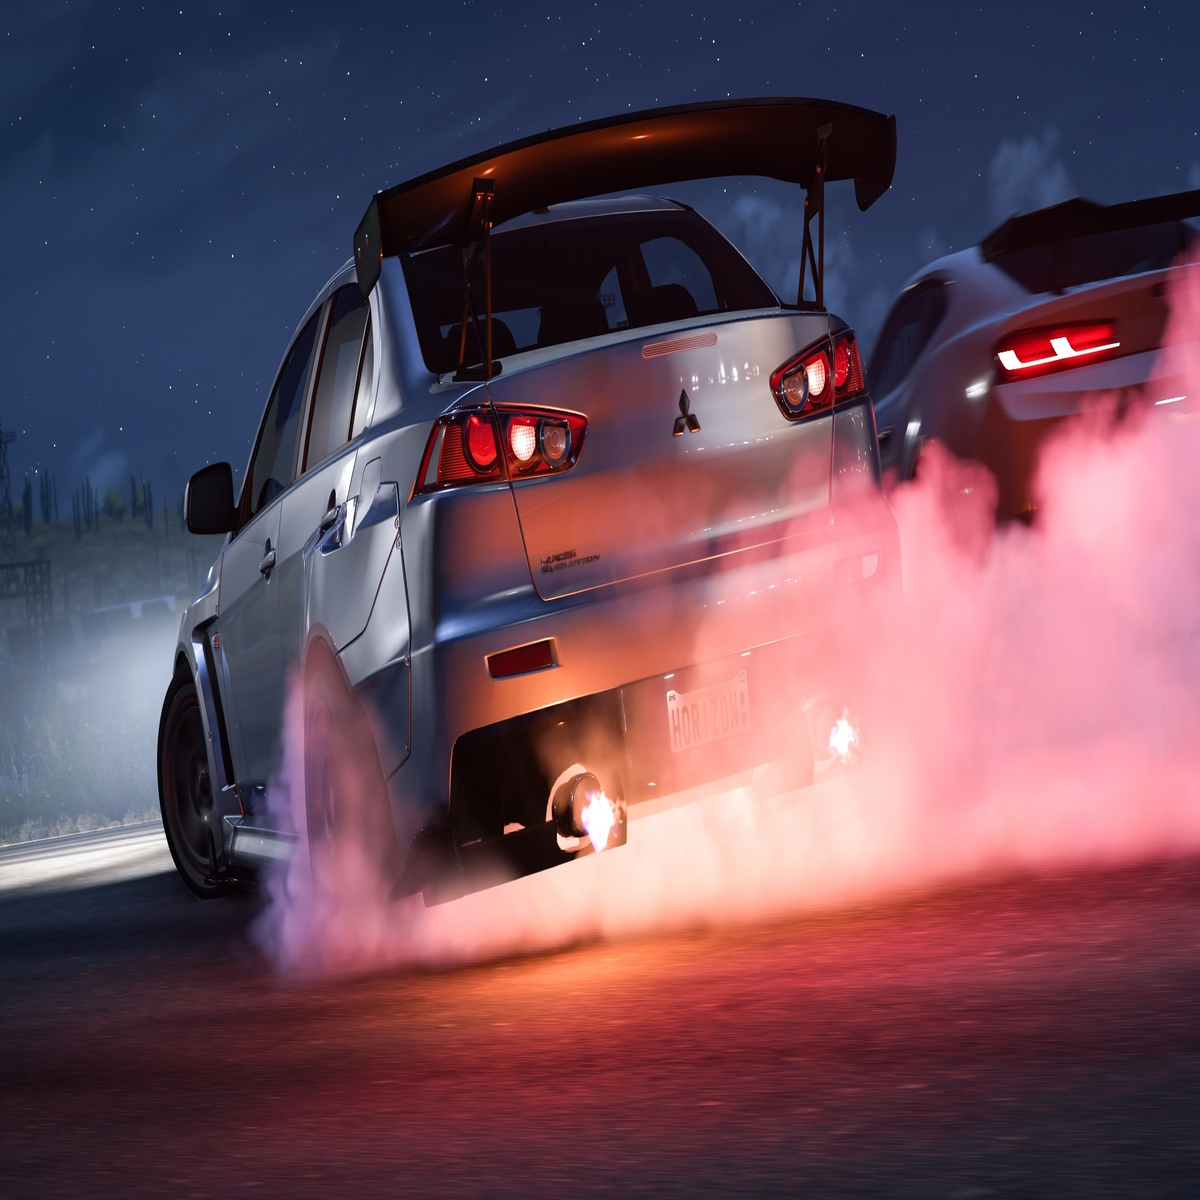 Forza Motorsport peaks at less than 5,000 concurrent players on